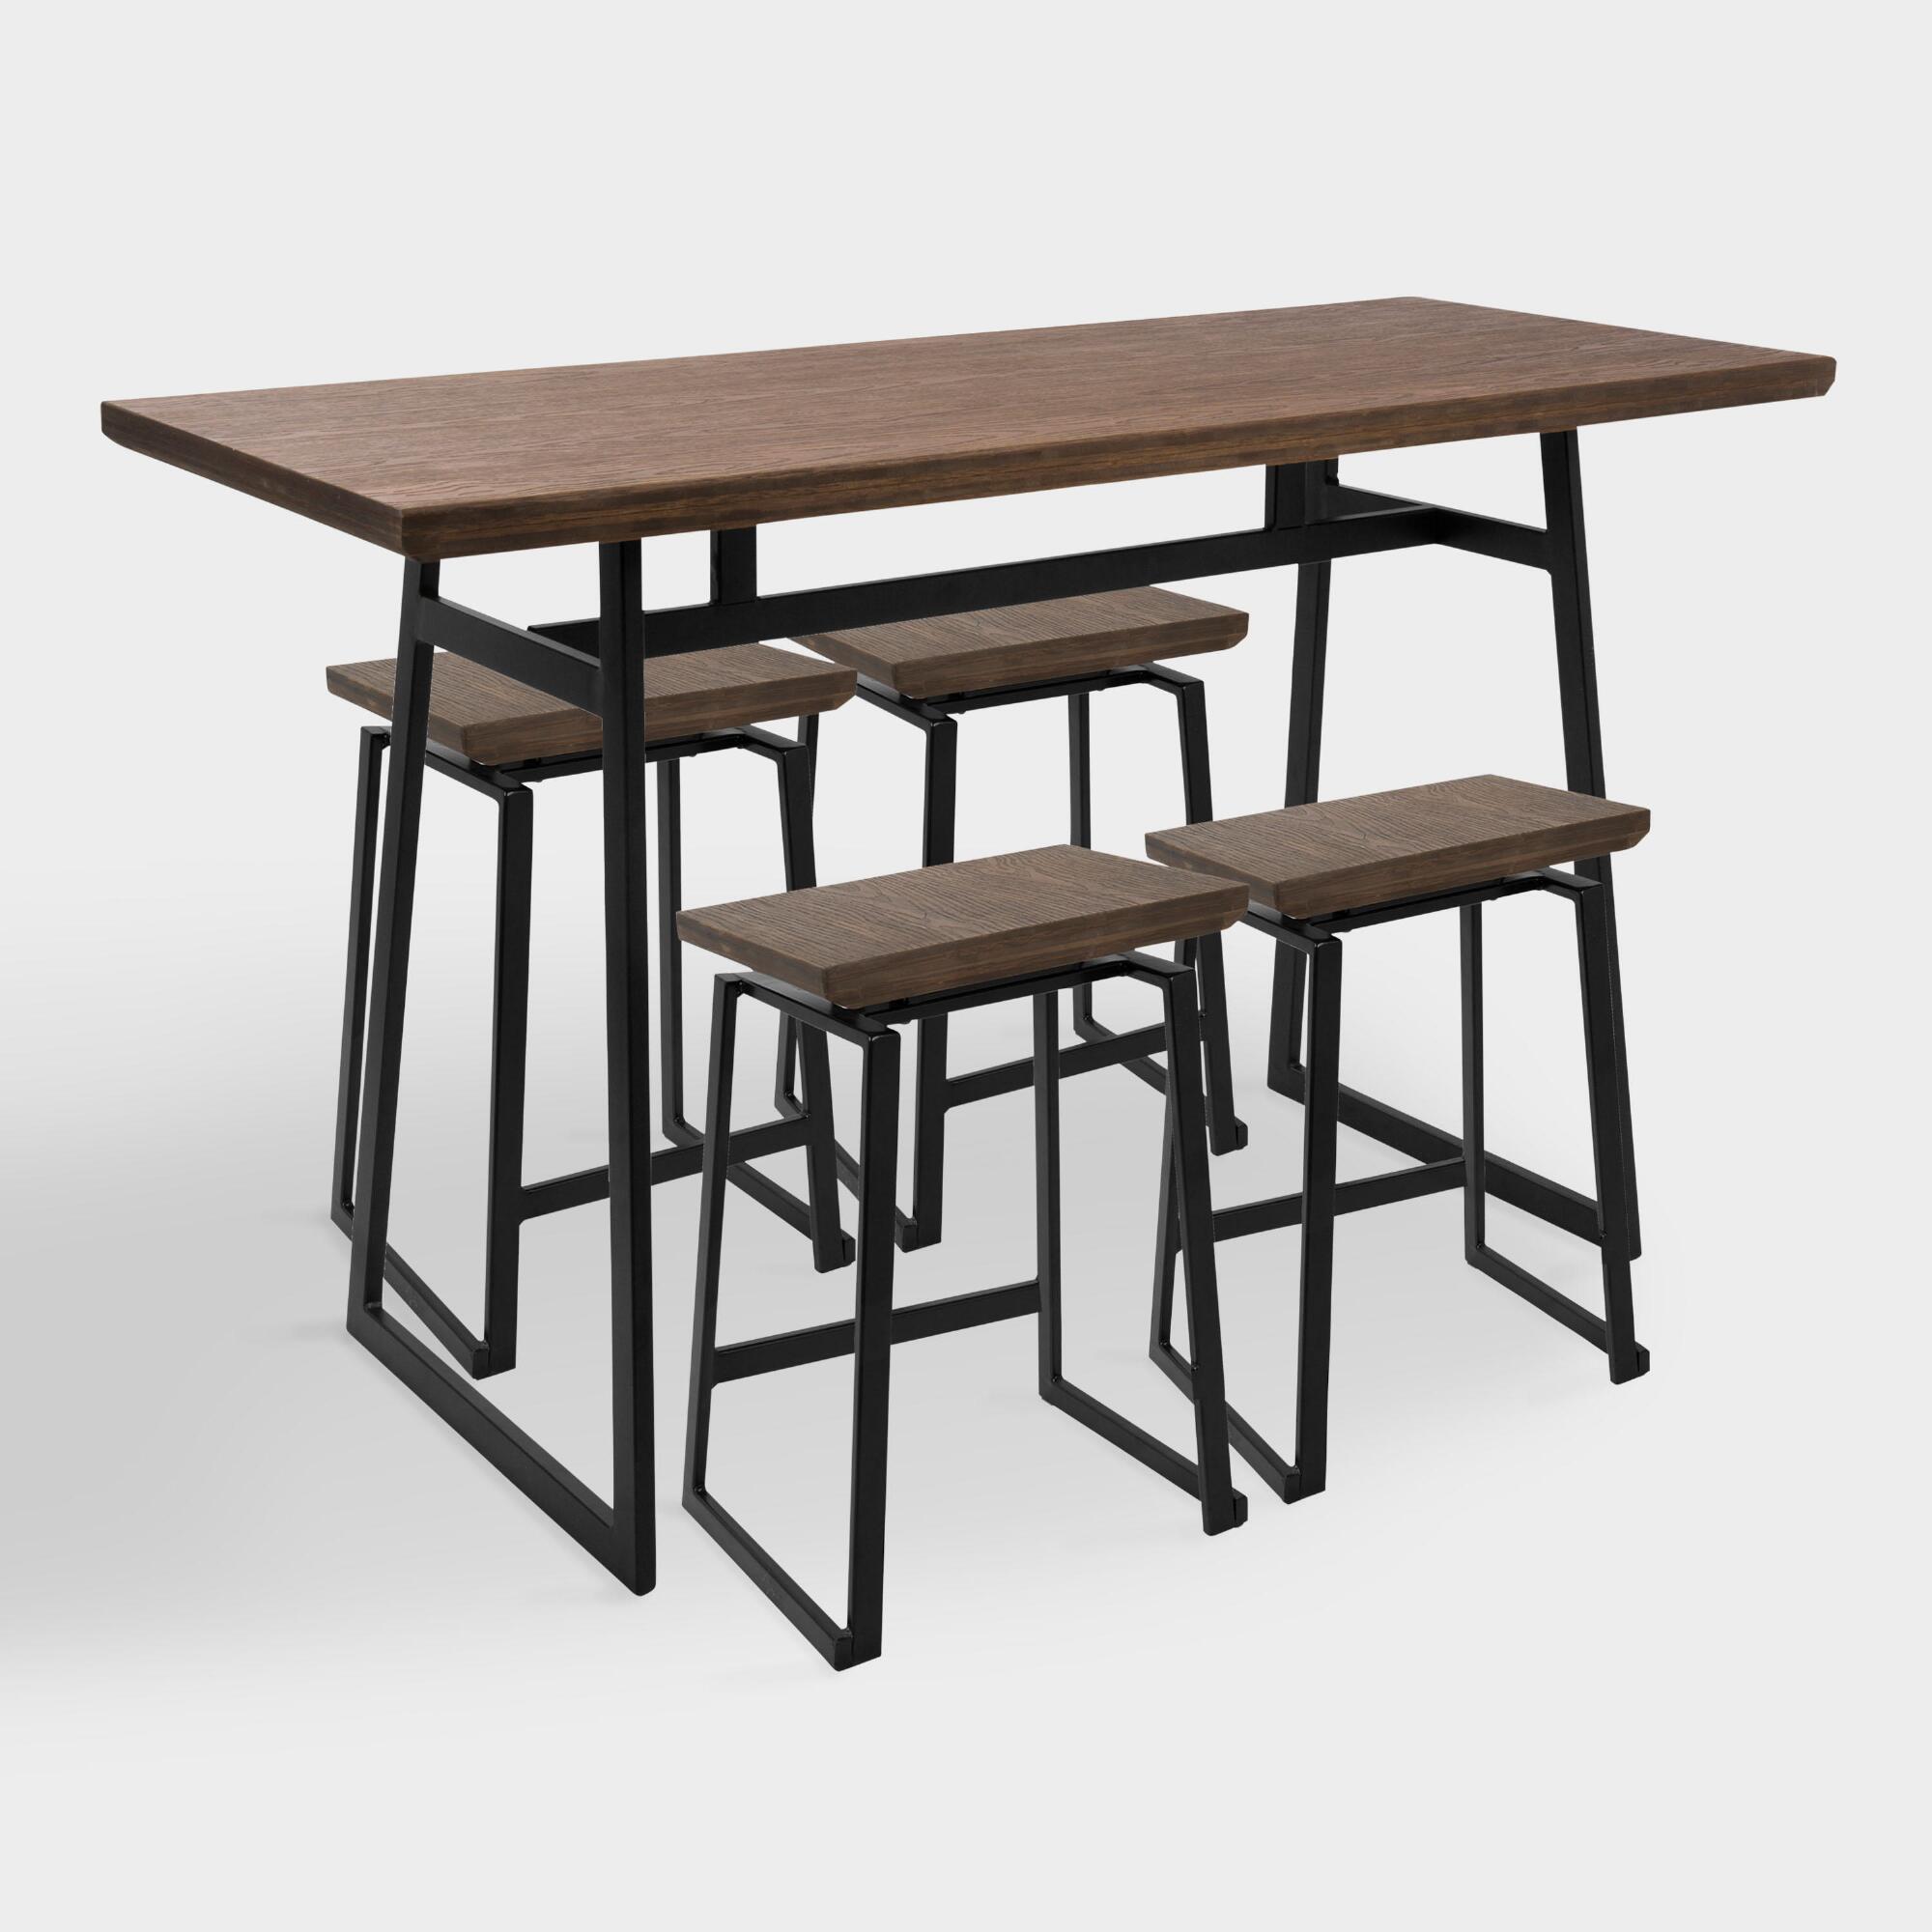 Metal and Wood Matthias Counter Height Dining Collection by World Market